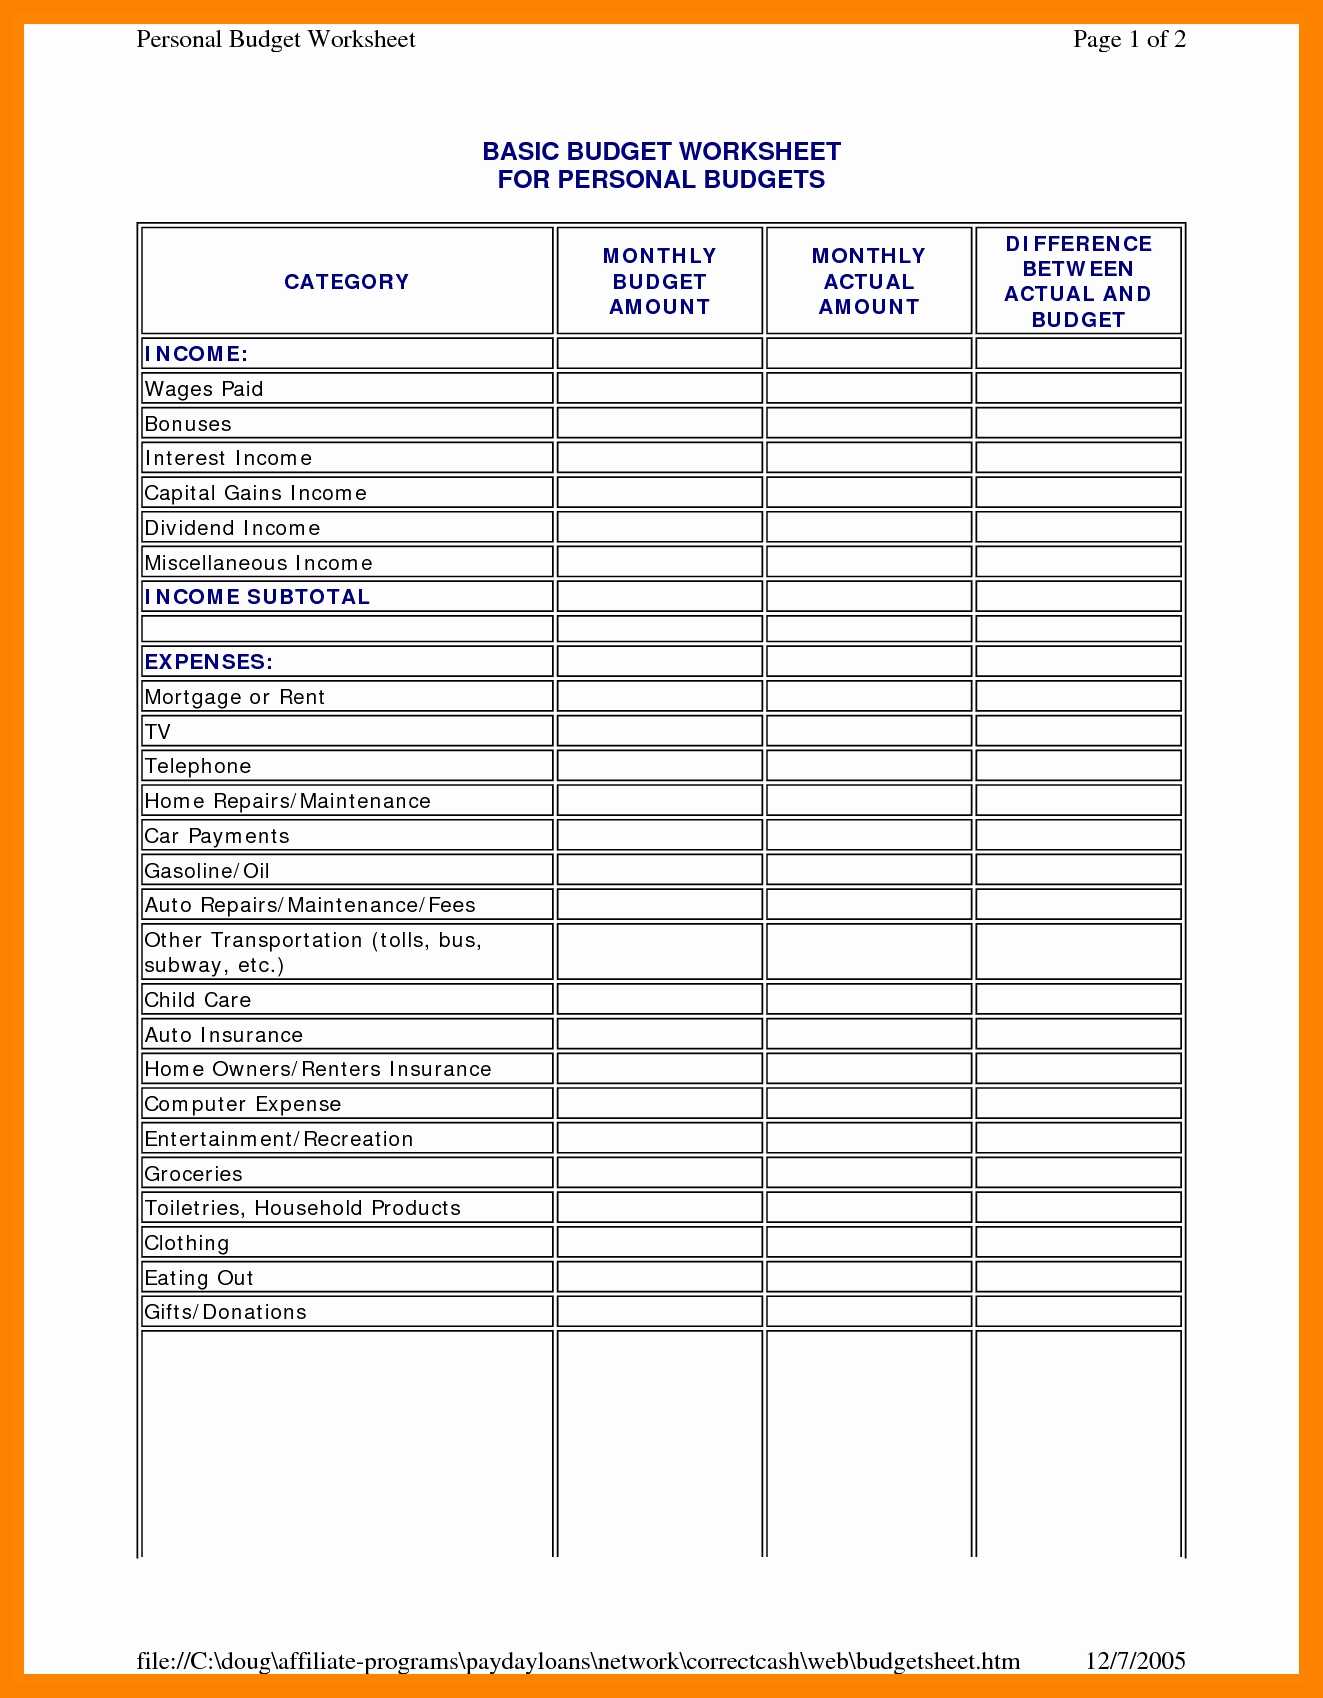 Monthly Budget Worksheet Pdf Along with Easy Bud Ing Worksheets S Highest Quality Take Control